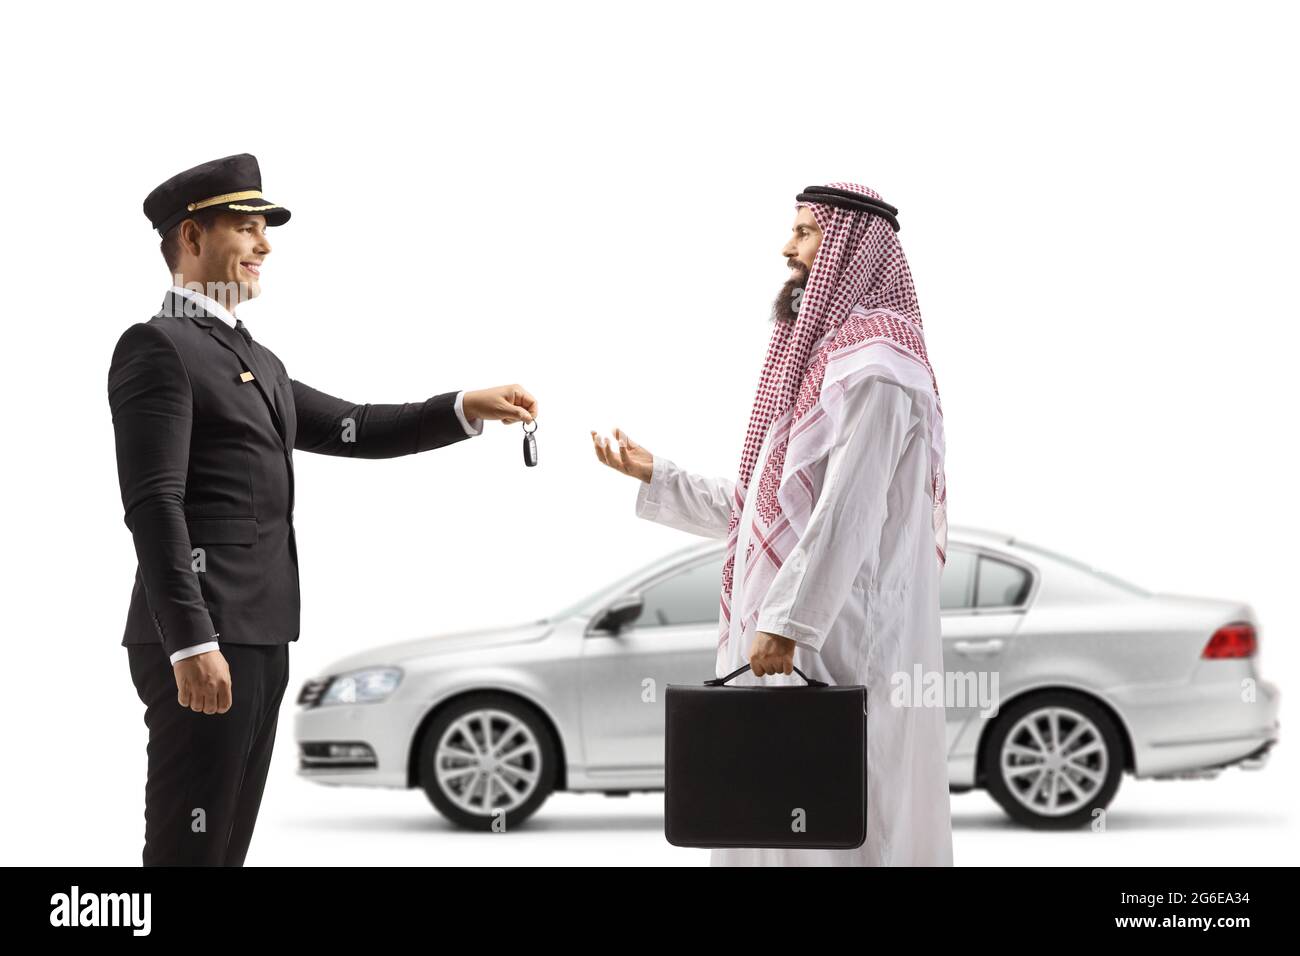 Chauffeur giving car keys from a silver car to a saudi arab man isolated on white background Stock Photo